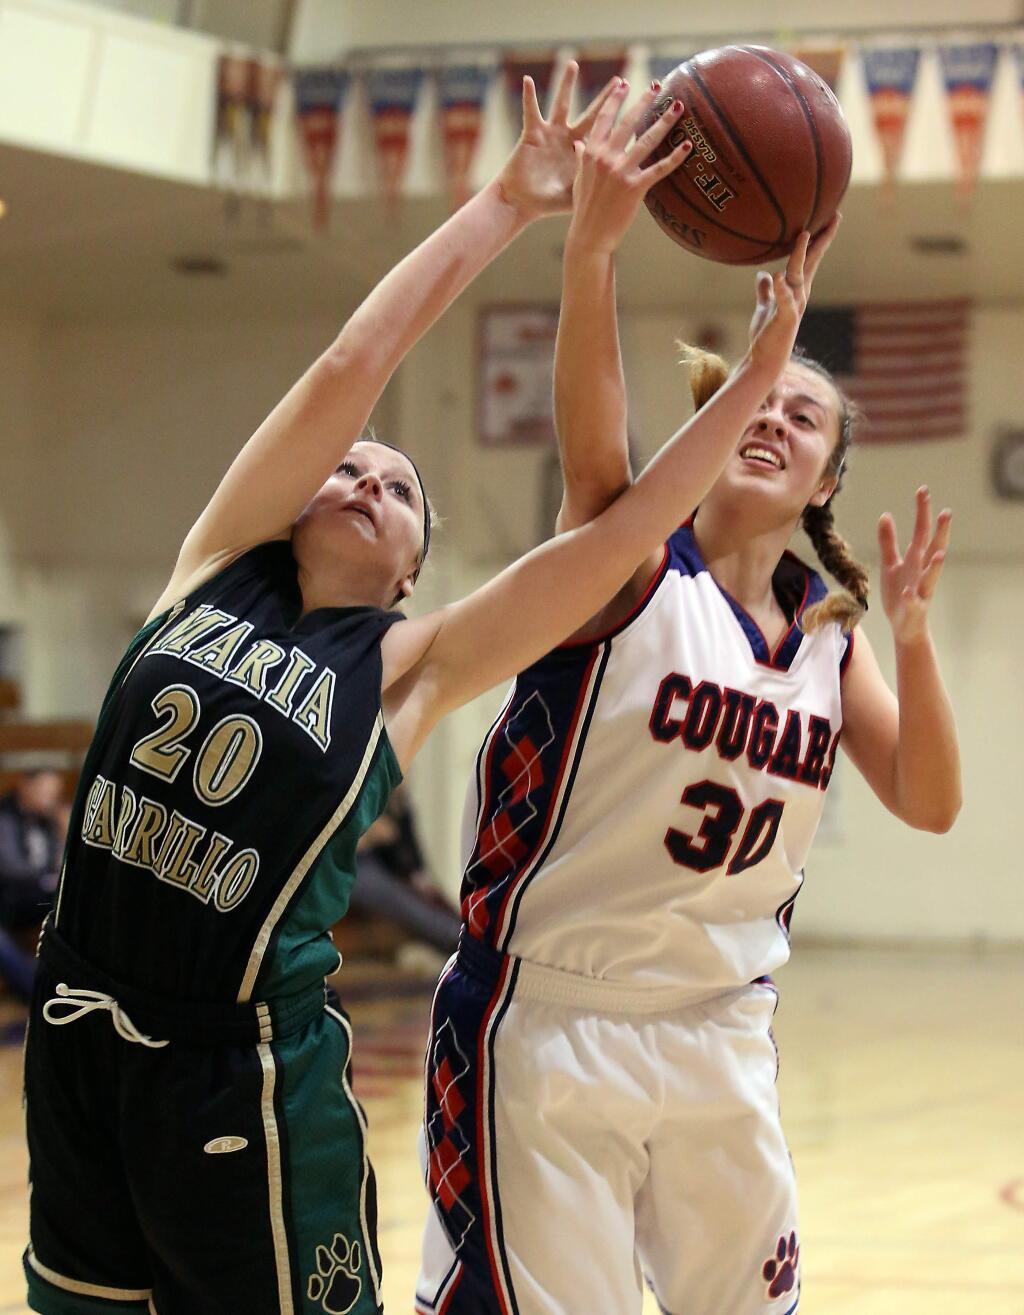 Maria Carrillo's Claire Howard, left, and Rancho Cotate's Camille Spackman, right, go up for the rebound during the game held at Rancho Cotate High School, Tuesday, January 6, 2015. (Crista Jeremiason / The Press Democrat)